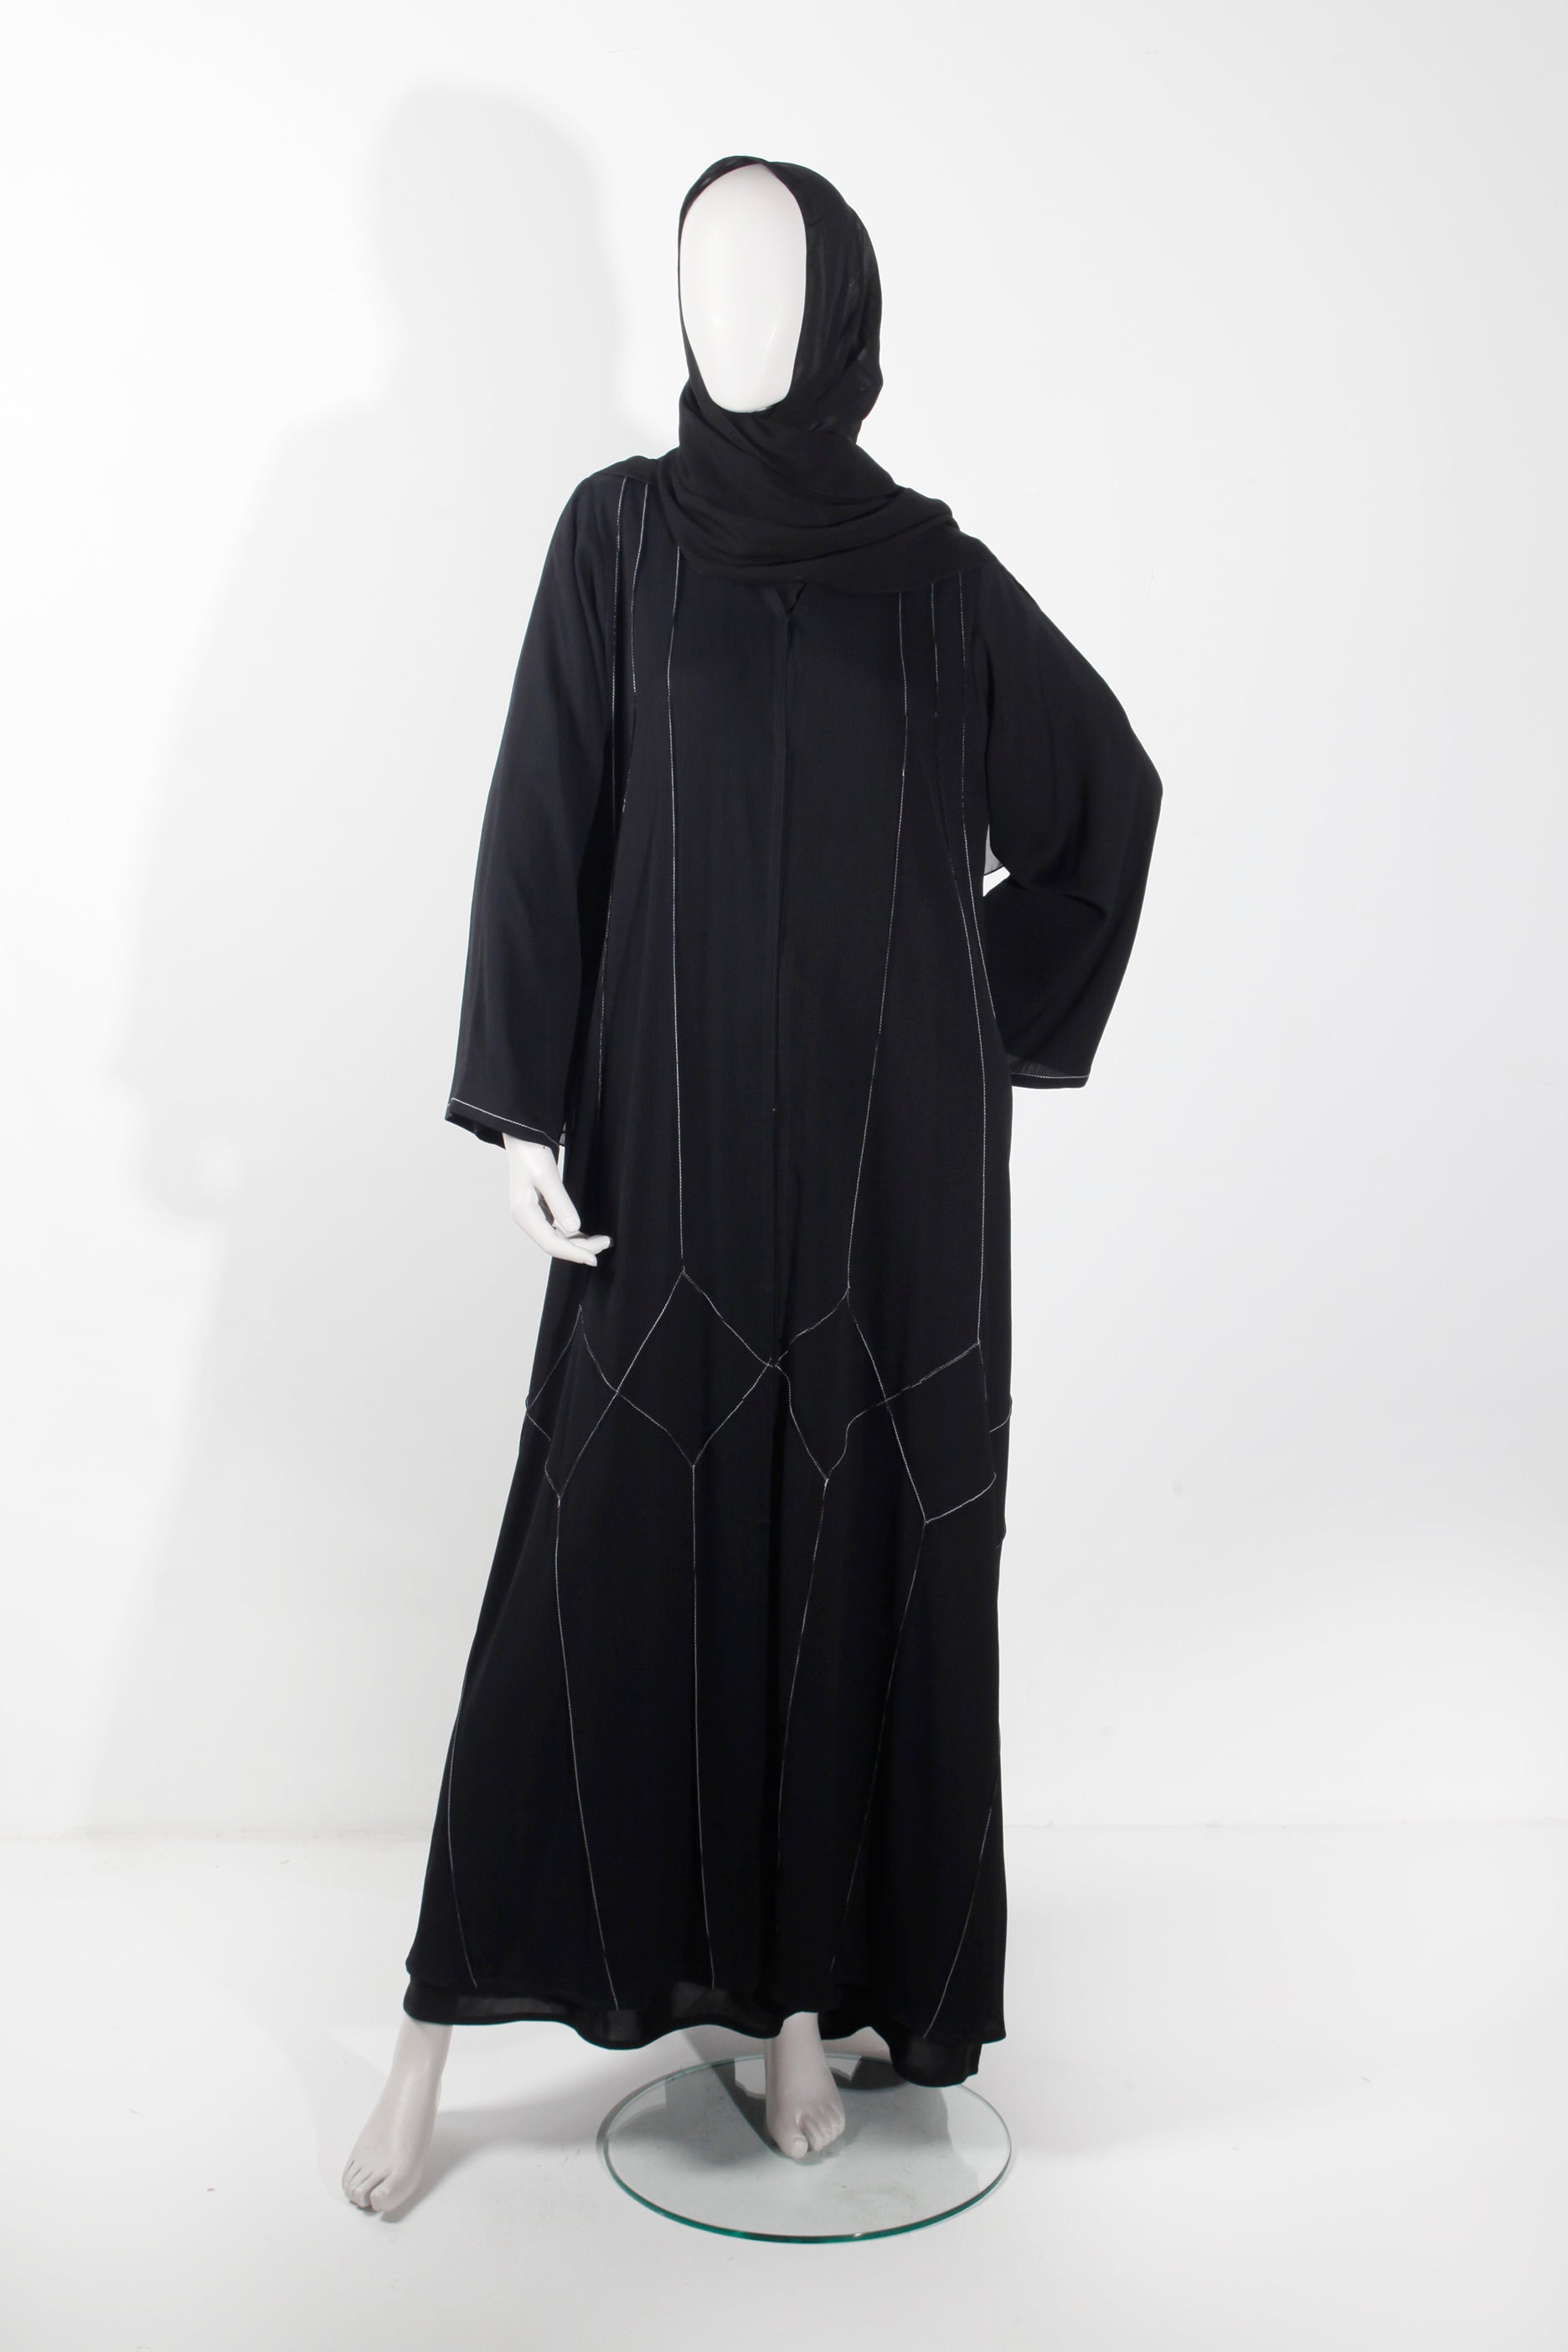 Black Abaya with White Embroidery